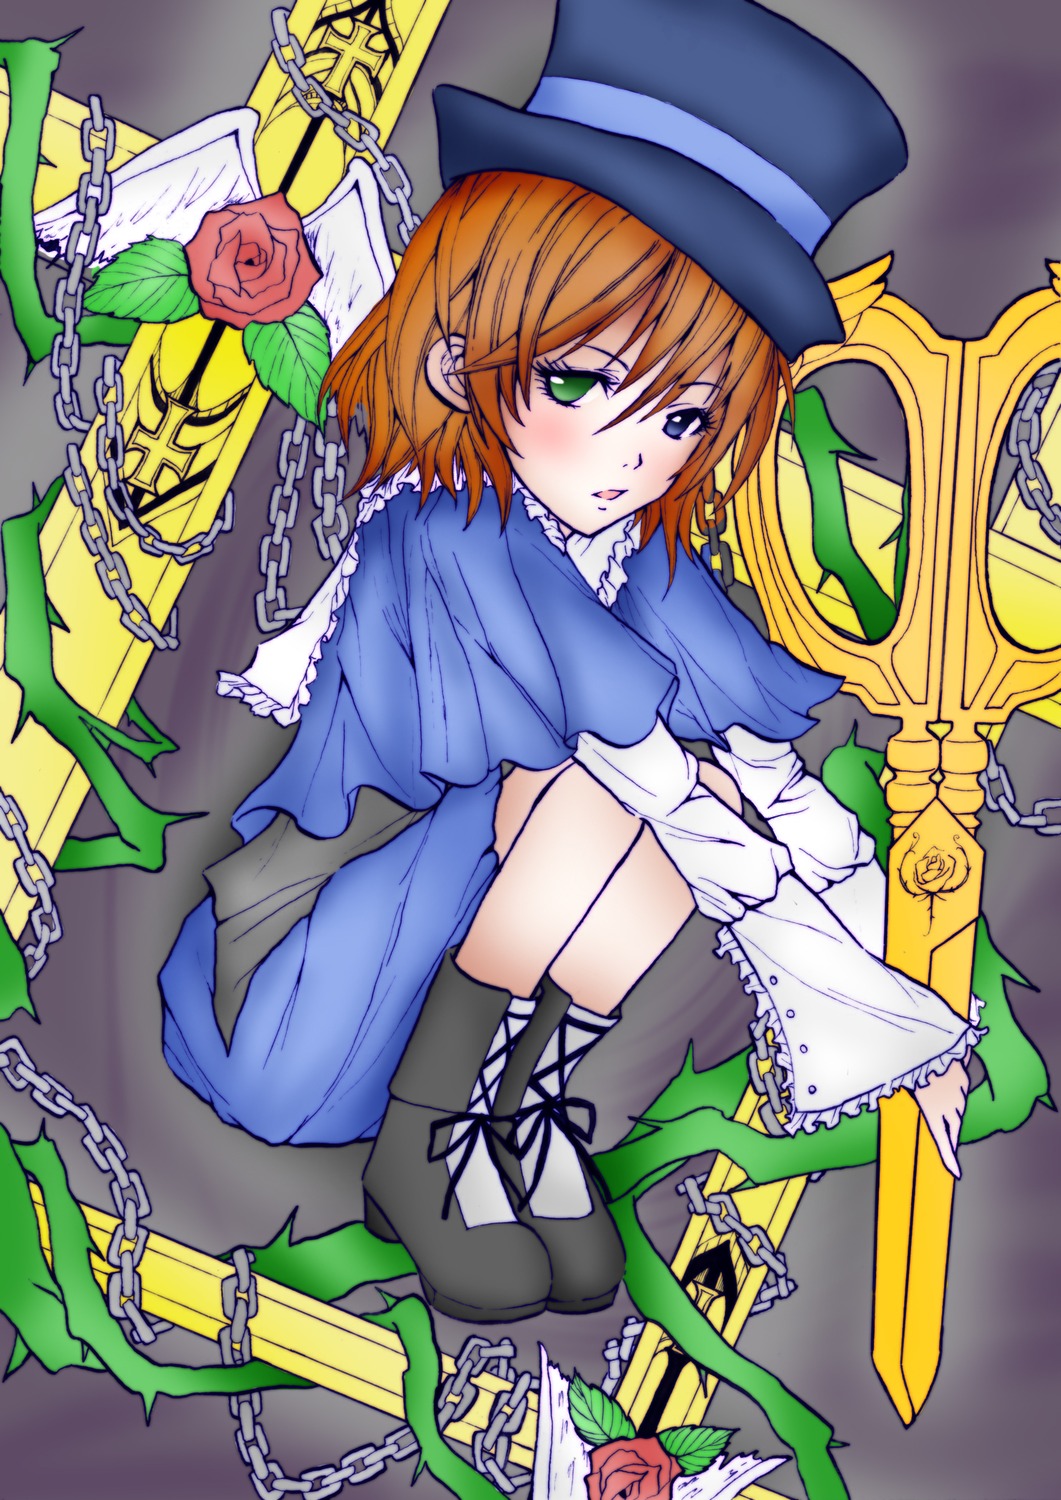 1girl anchor ankle_cuffs bdsm bondage boots bound broken broken_chain chain chain_necklace chained clock cuffs flail flower gold_chain green_eyes handcuffs hat heterochromia image key lock pearl_(gemstone) pink_rose pocket_watch red_flower red_rose rose shackles short_hair sickle sitting slave solo souseiseki swing top_hat watch yellow_flower yellow_rose